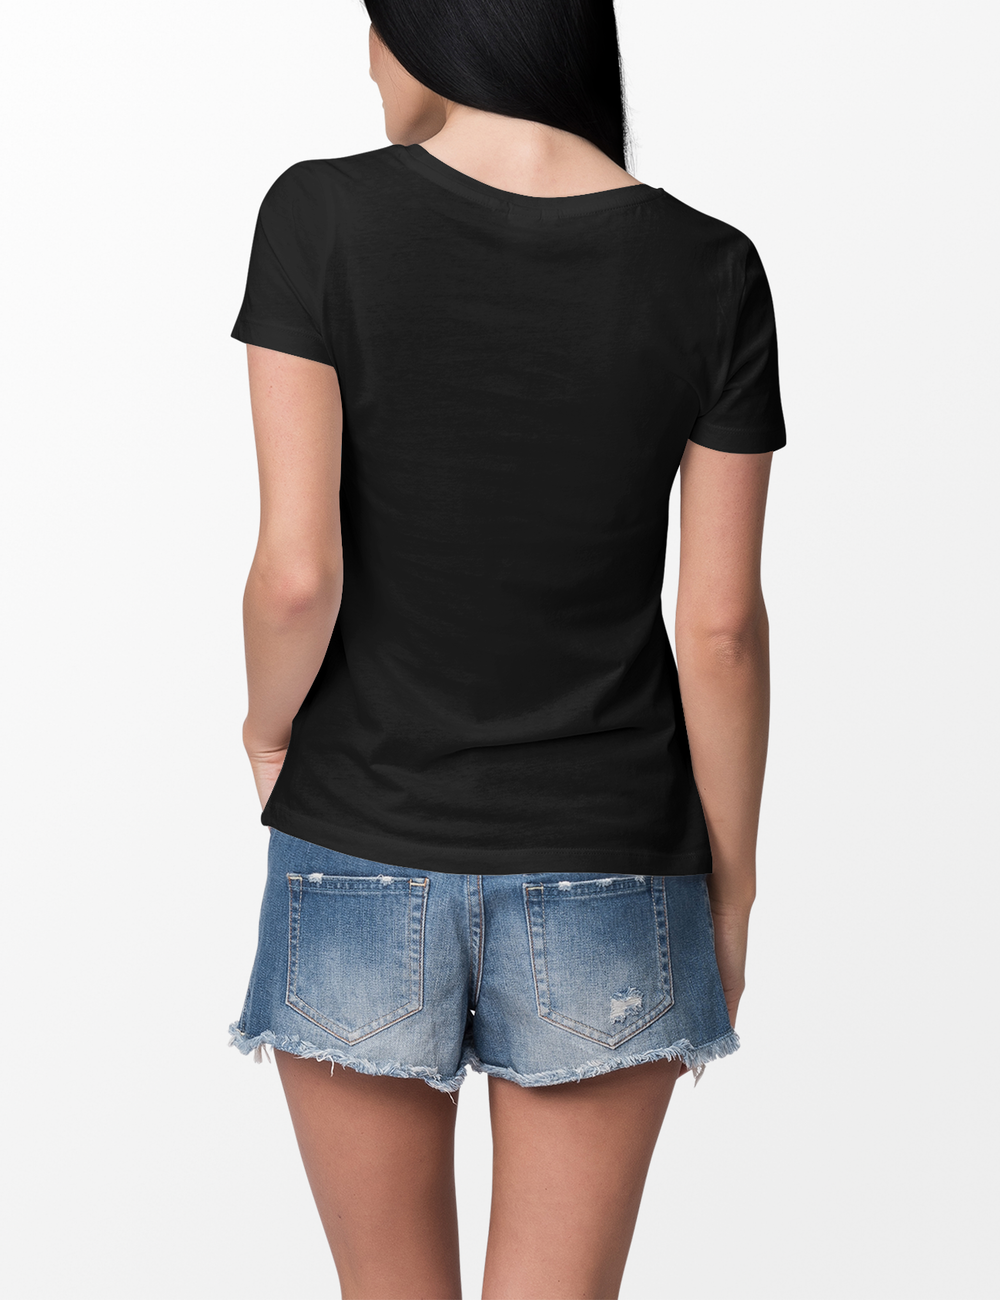 Don't Worry About Me Worry About The Bags Under Your Eyes | Women's Style T-Shirt OniTakai